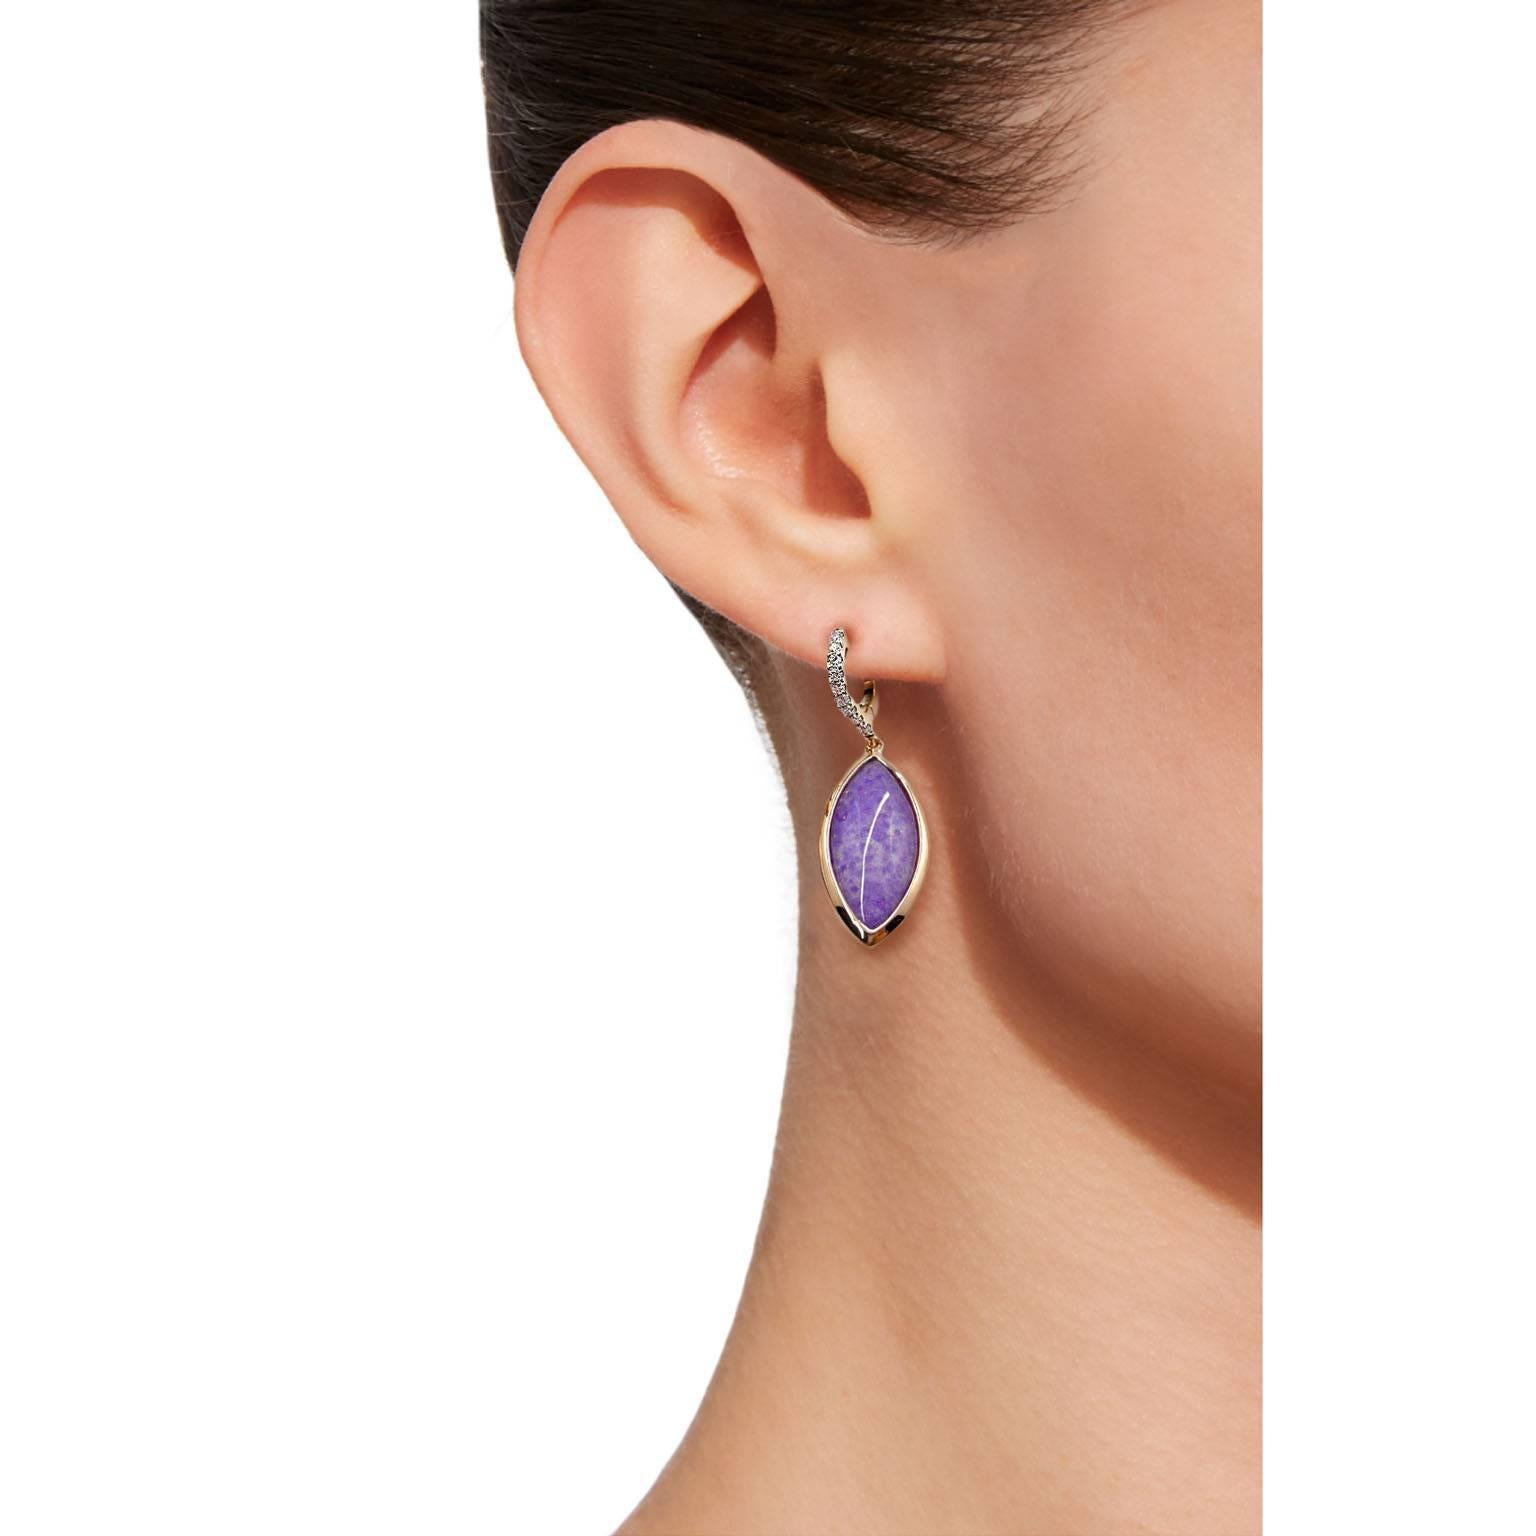 Jona design collection, hand crafted in Italy, 18 Karat rose gold drop earrings set with a cabochon cut Quartz over Sugilite weighing 8.67 carats with 0.17 carats of brown diamonds. Clips can be mounted upon request.
Dimensions : H 1.37 in x W 0.43